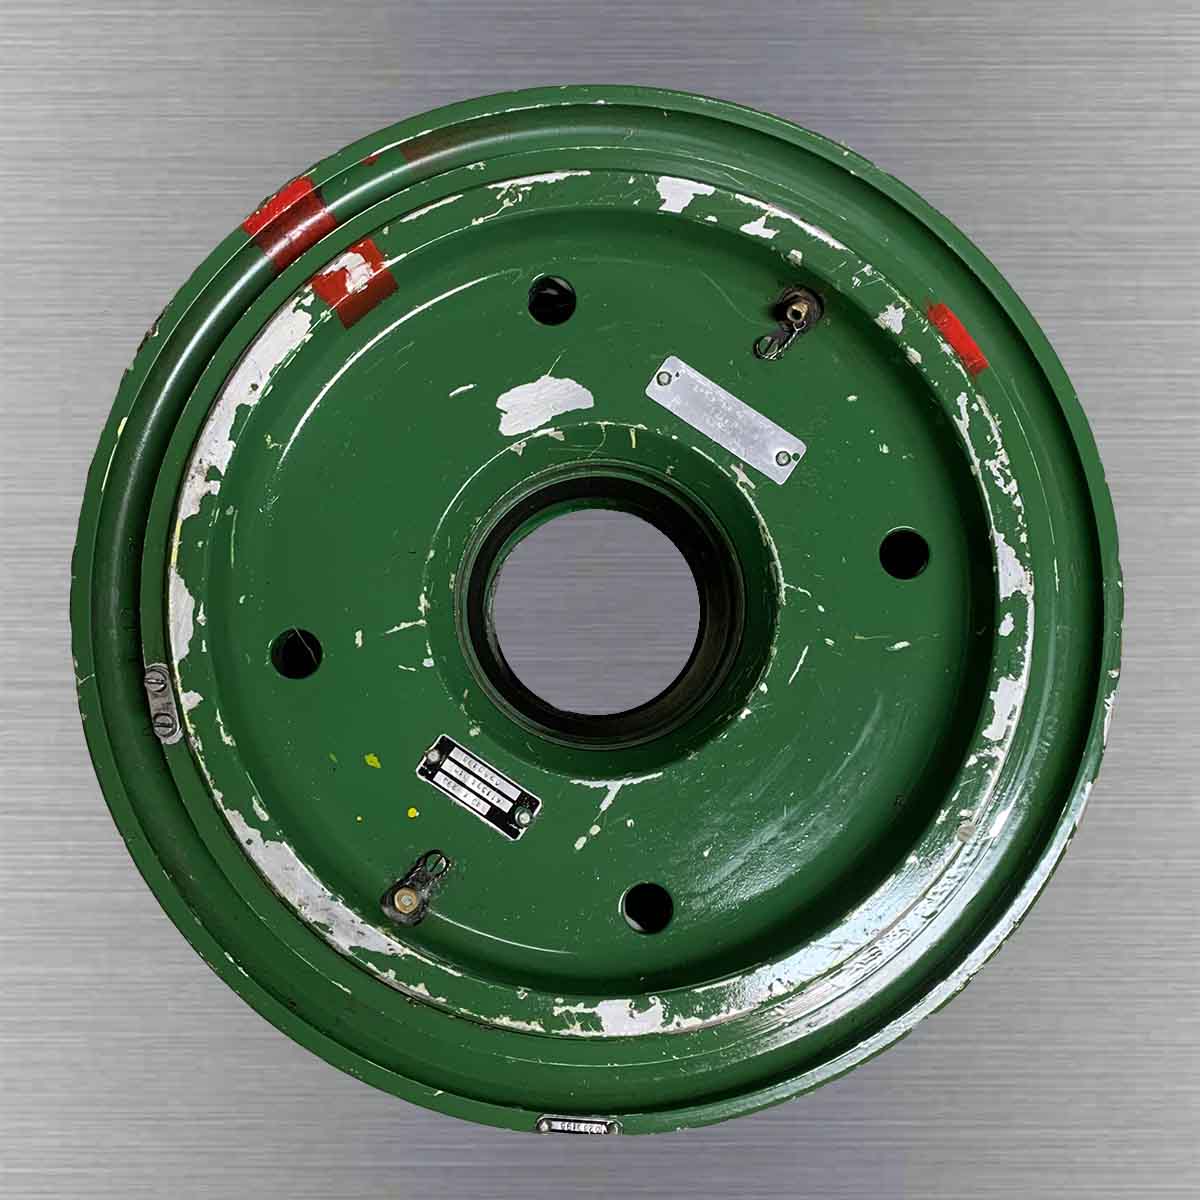 Top view of the original MiG-29 main landing wheel used for the side table.